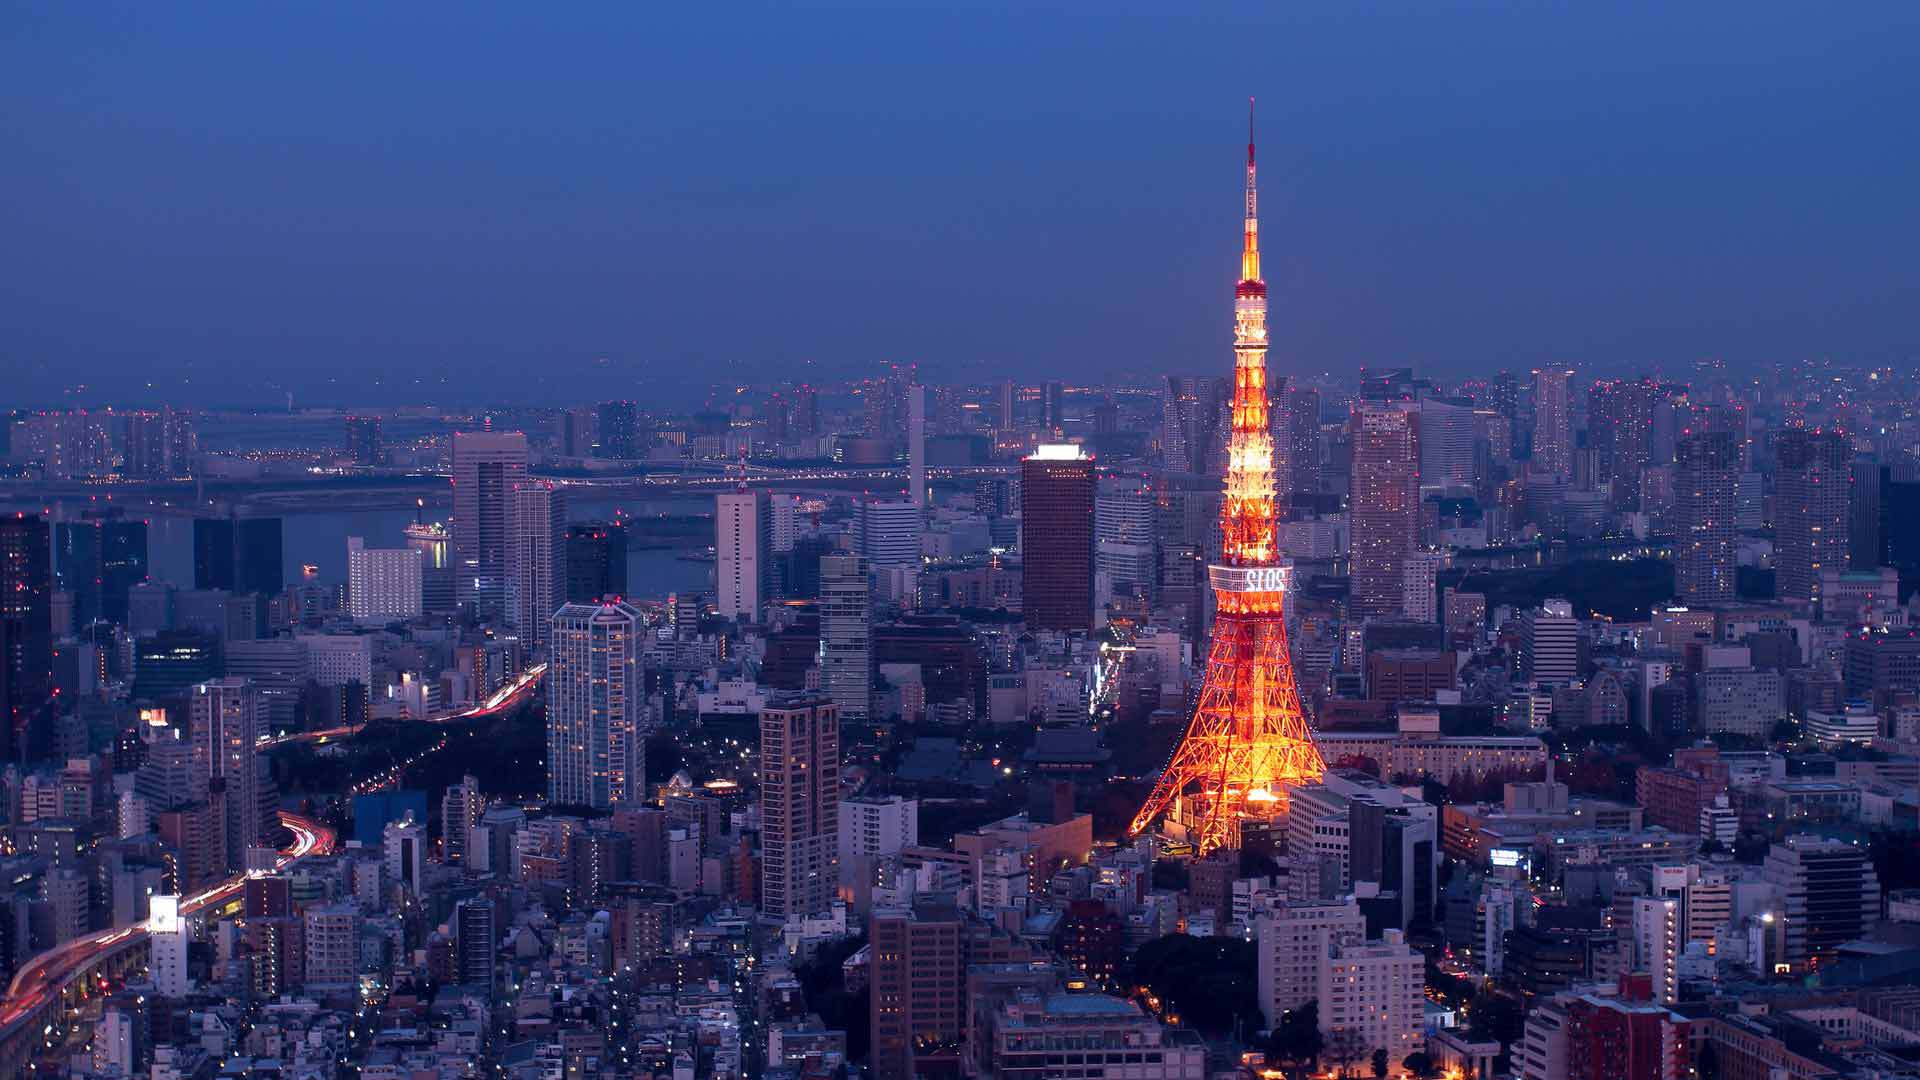 TV Tower in Tokyo wallpaper and image, picture, photo